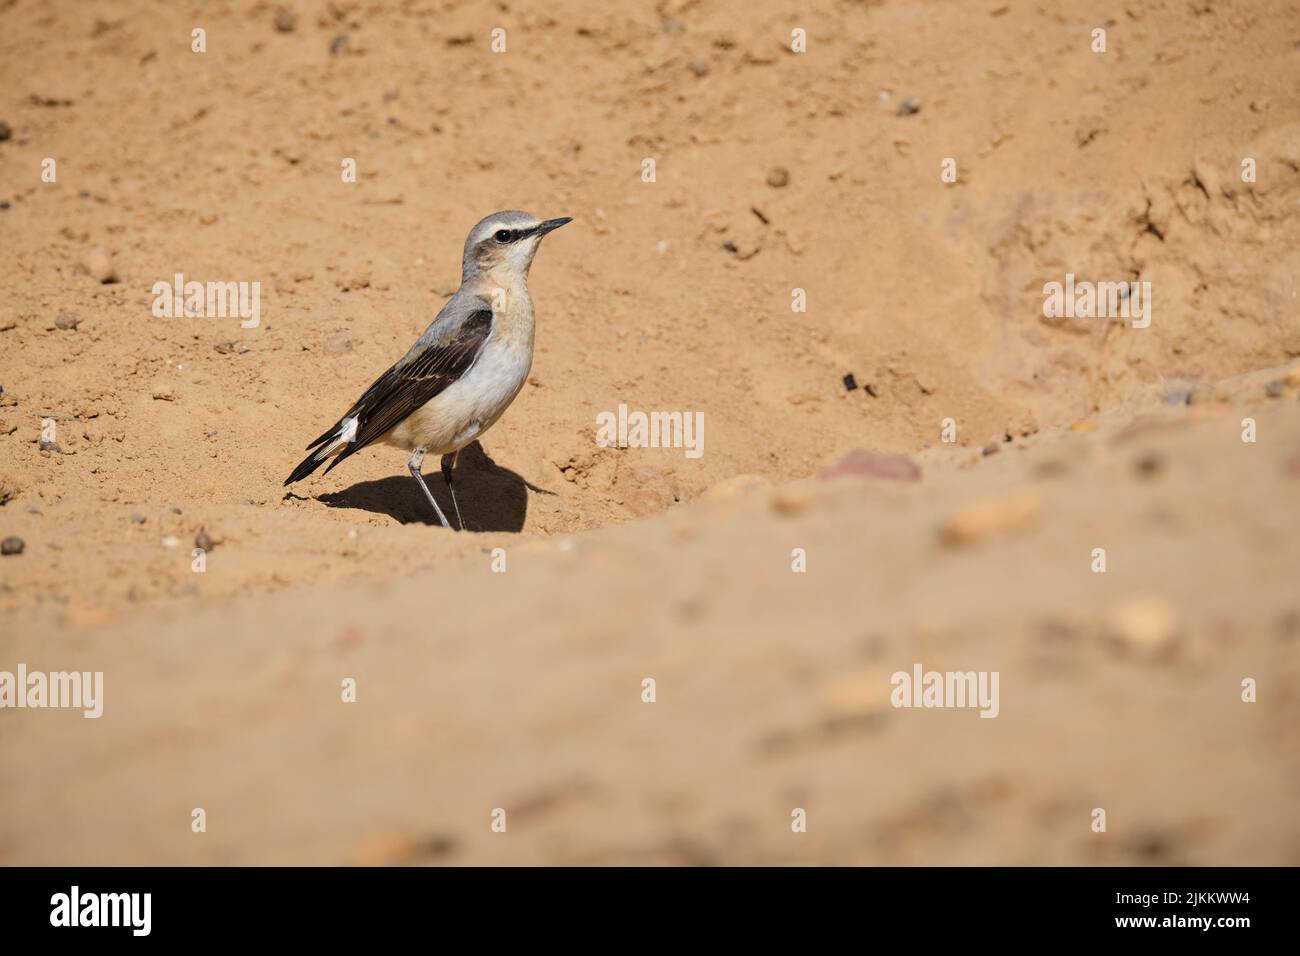 Curious northern wheatear standing on dry sand on sunny summer day in desert Stock Photo